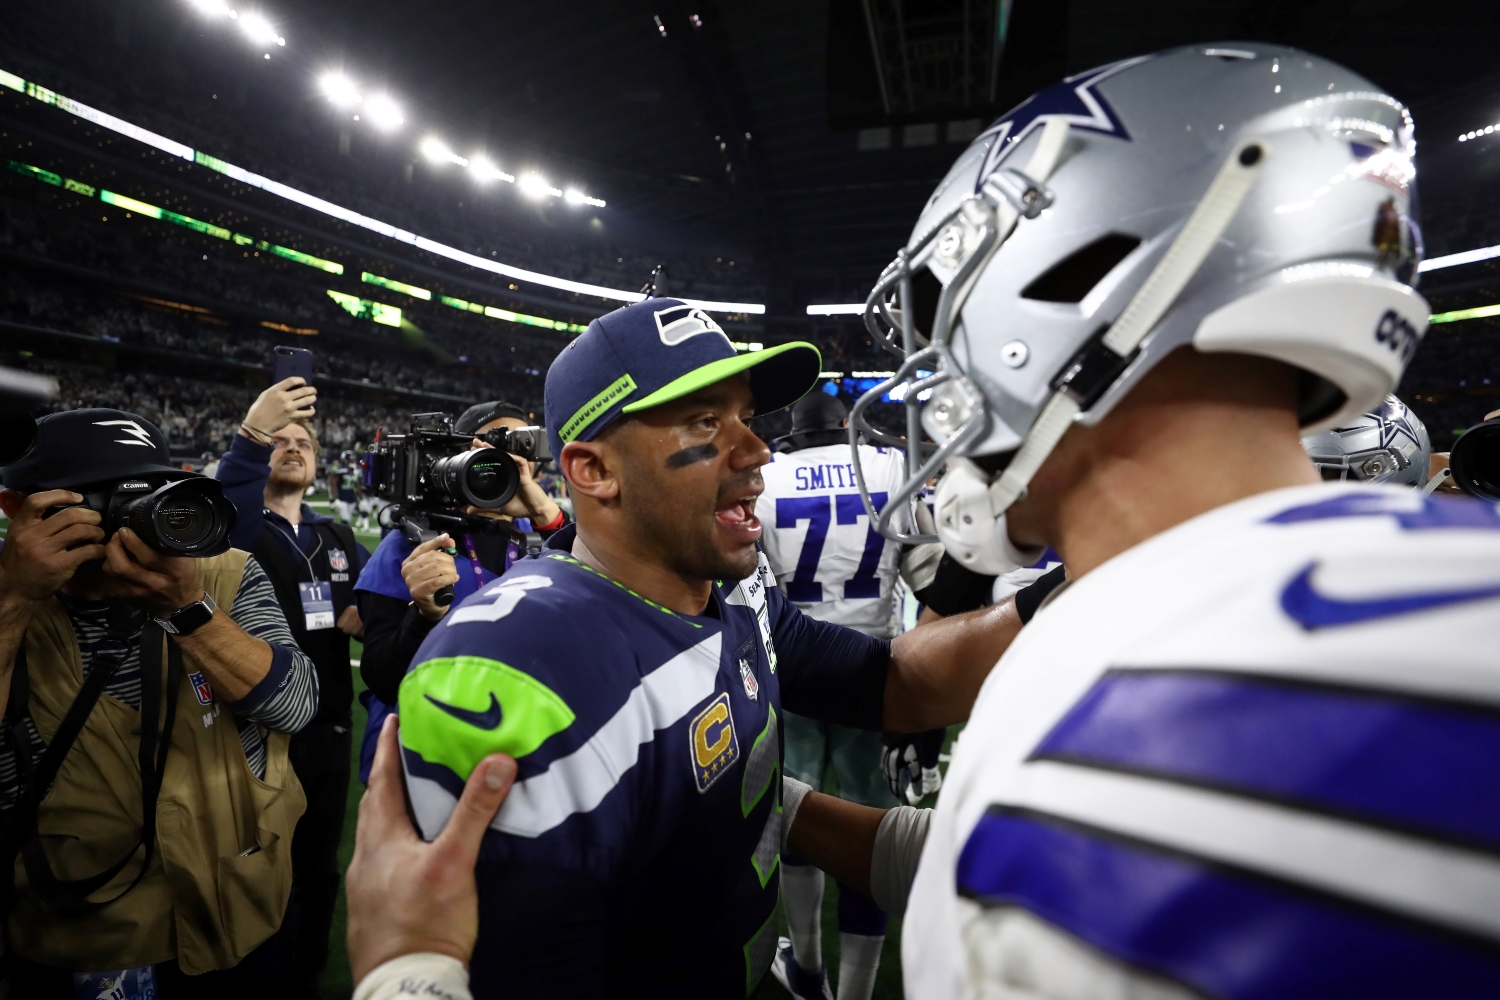 Dak Prescott of the Dallas Cowboys talks with Russell Wilson of the Seattle Seahawks after the Cowboys defeated the Seahawks 24-22 in the Wild Card Round.